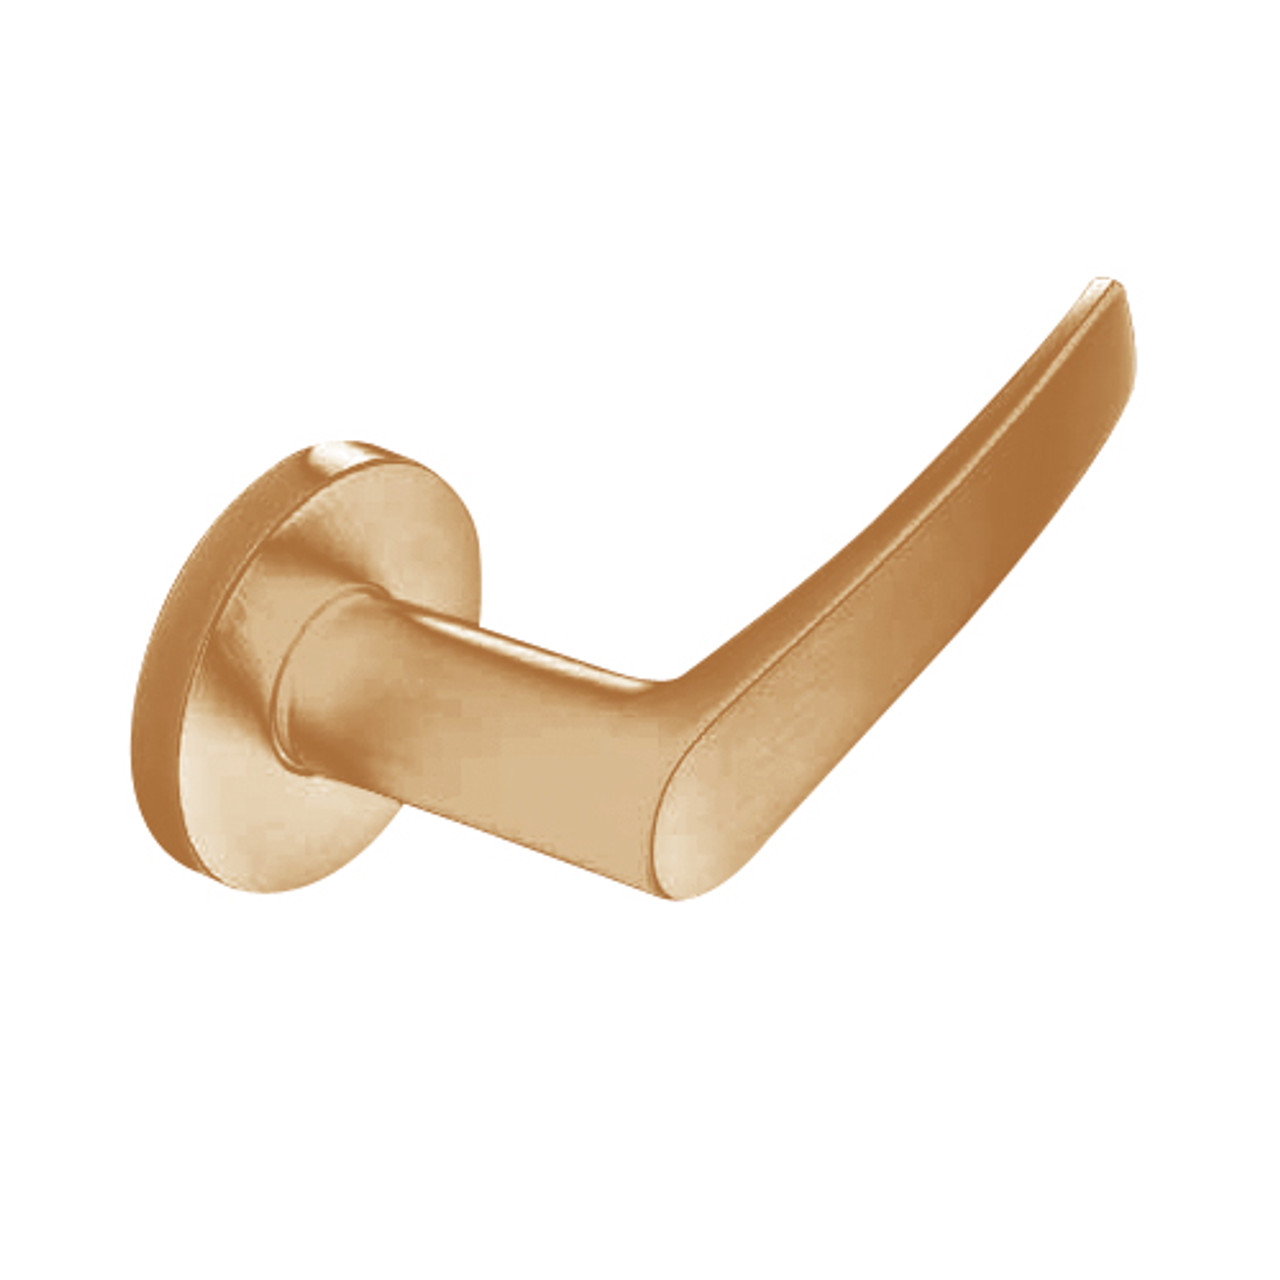 ML2020-ASF-612 Corbin Russwin ML2000 Series Mortise Privacy Locksets with Armstrong Lever in Satin Bronze